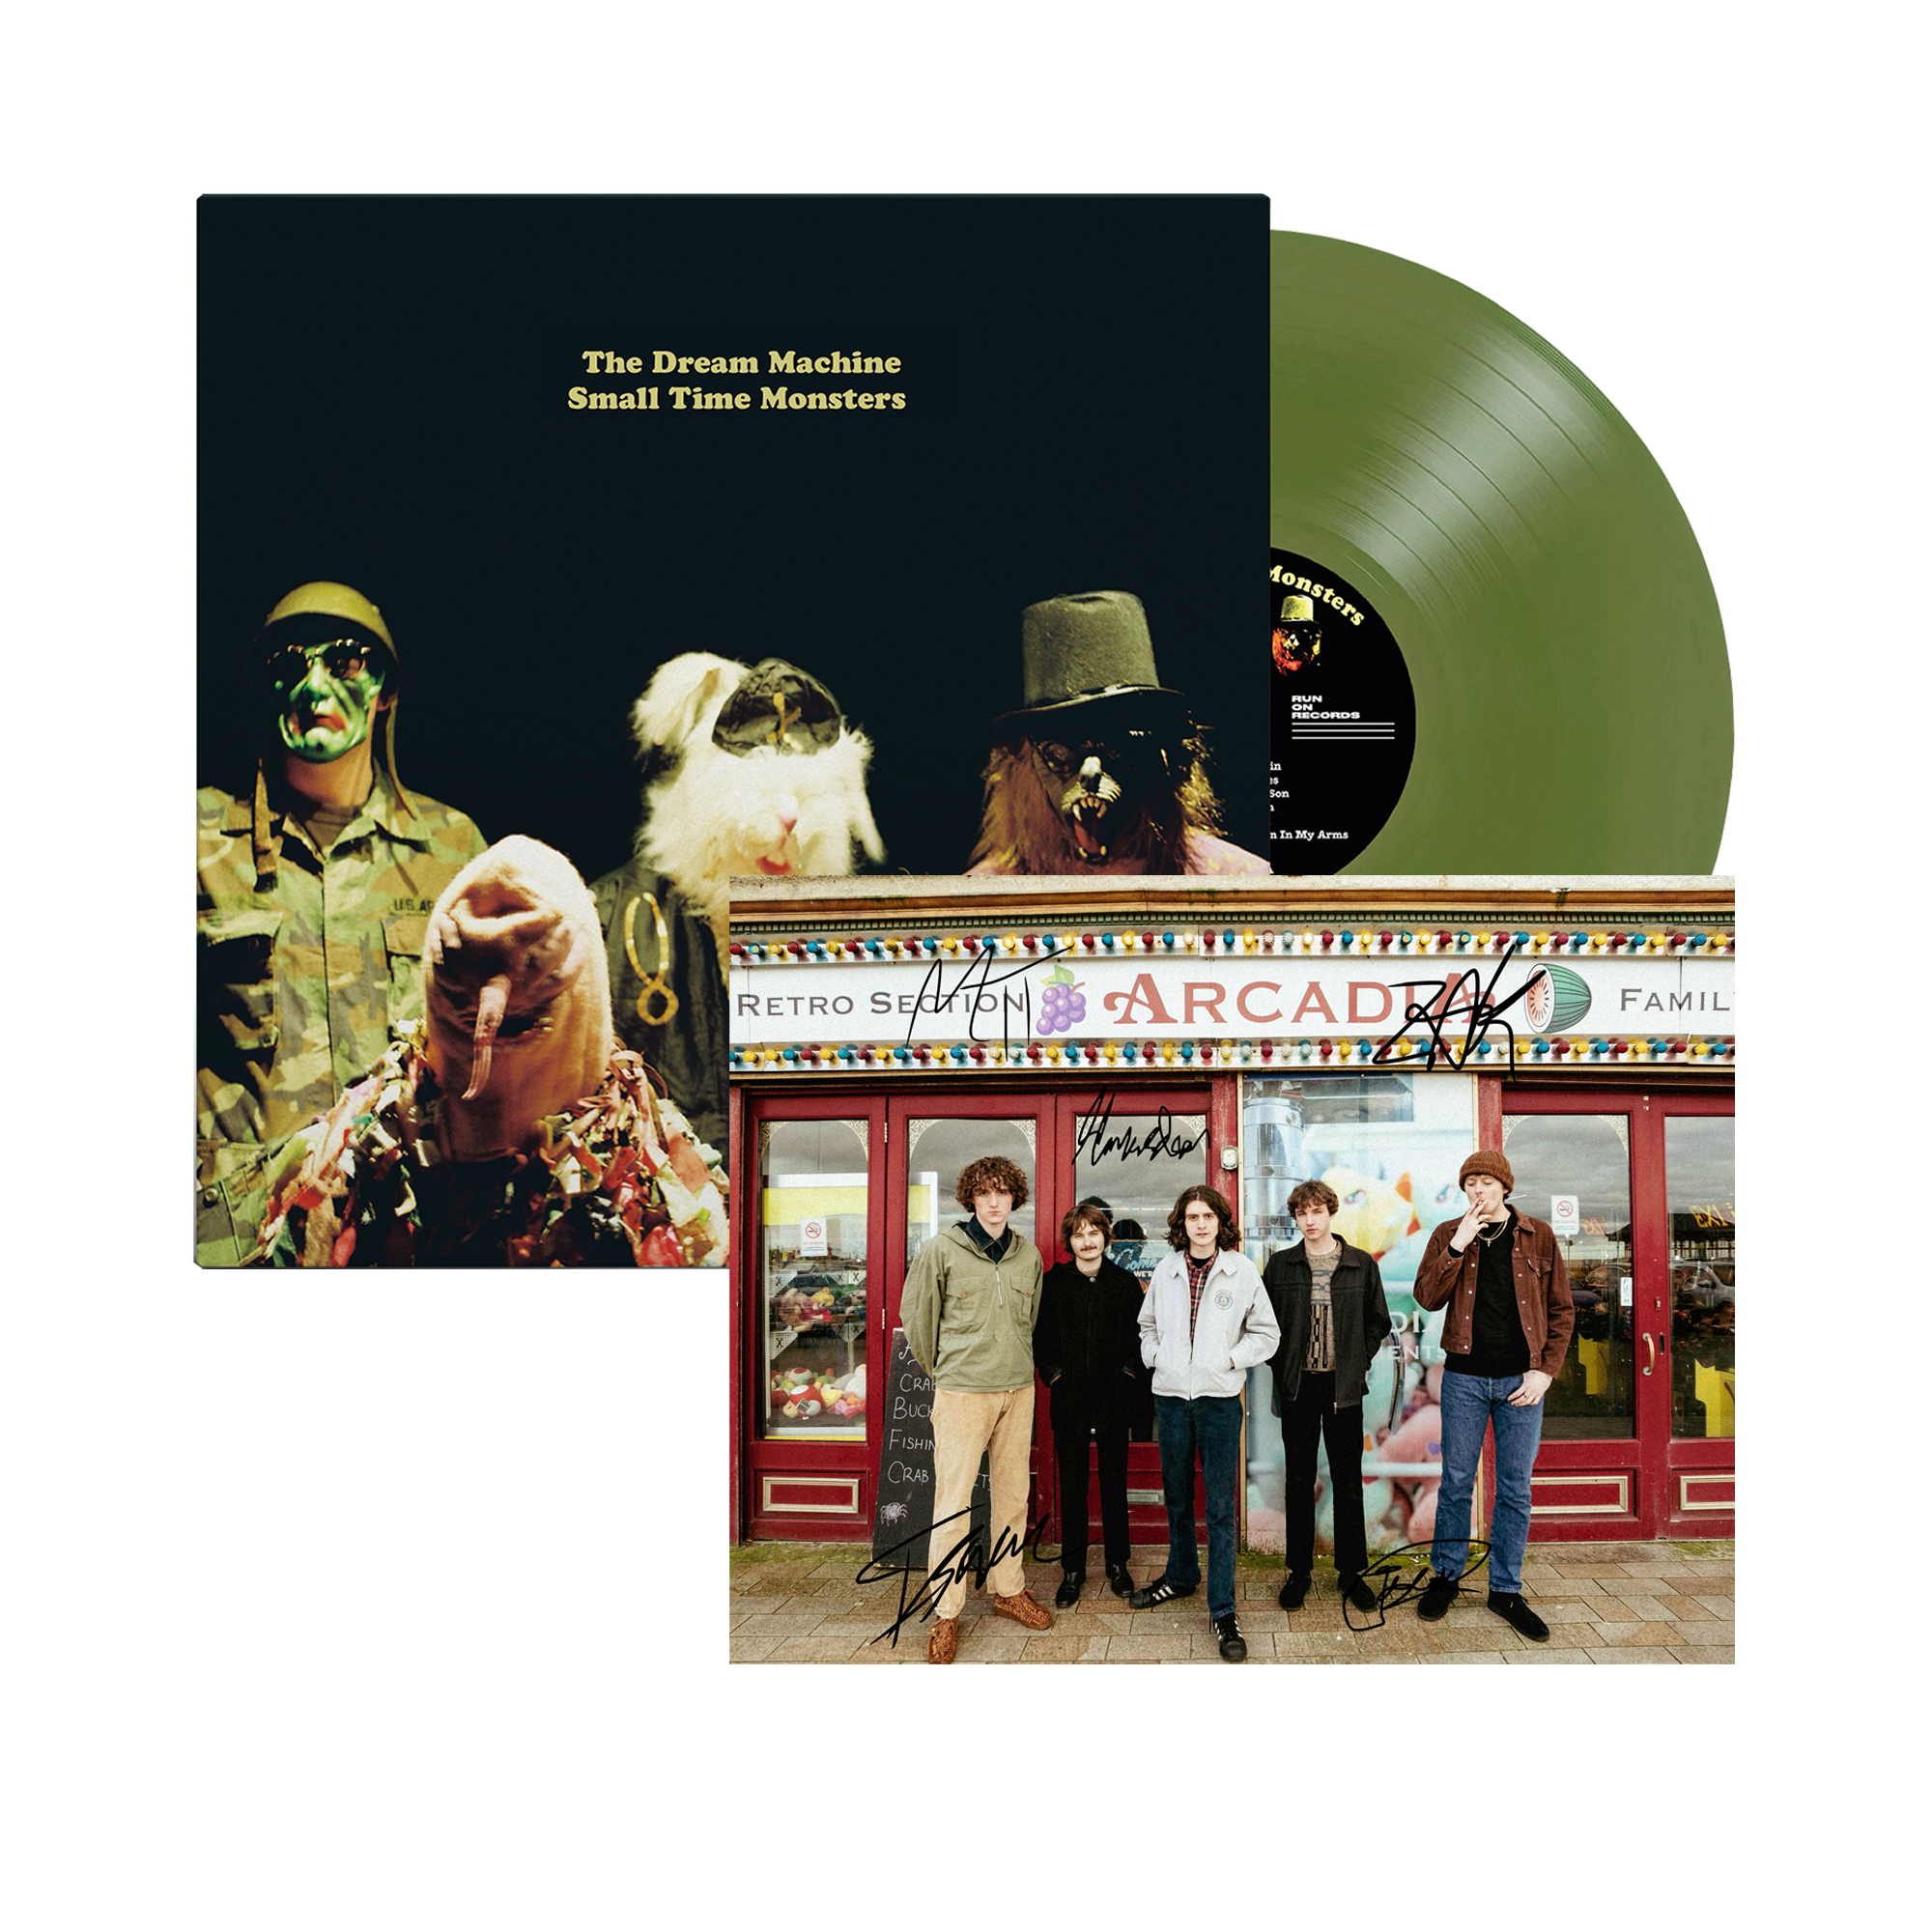 Small Time Monsters - Limited Edition LP + Signed Print